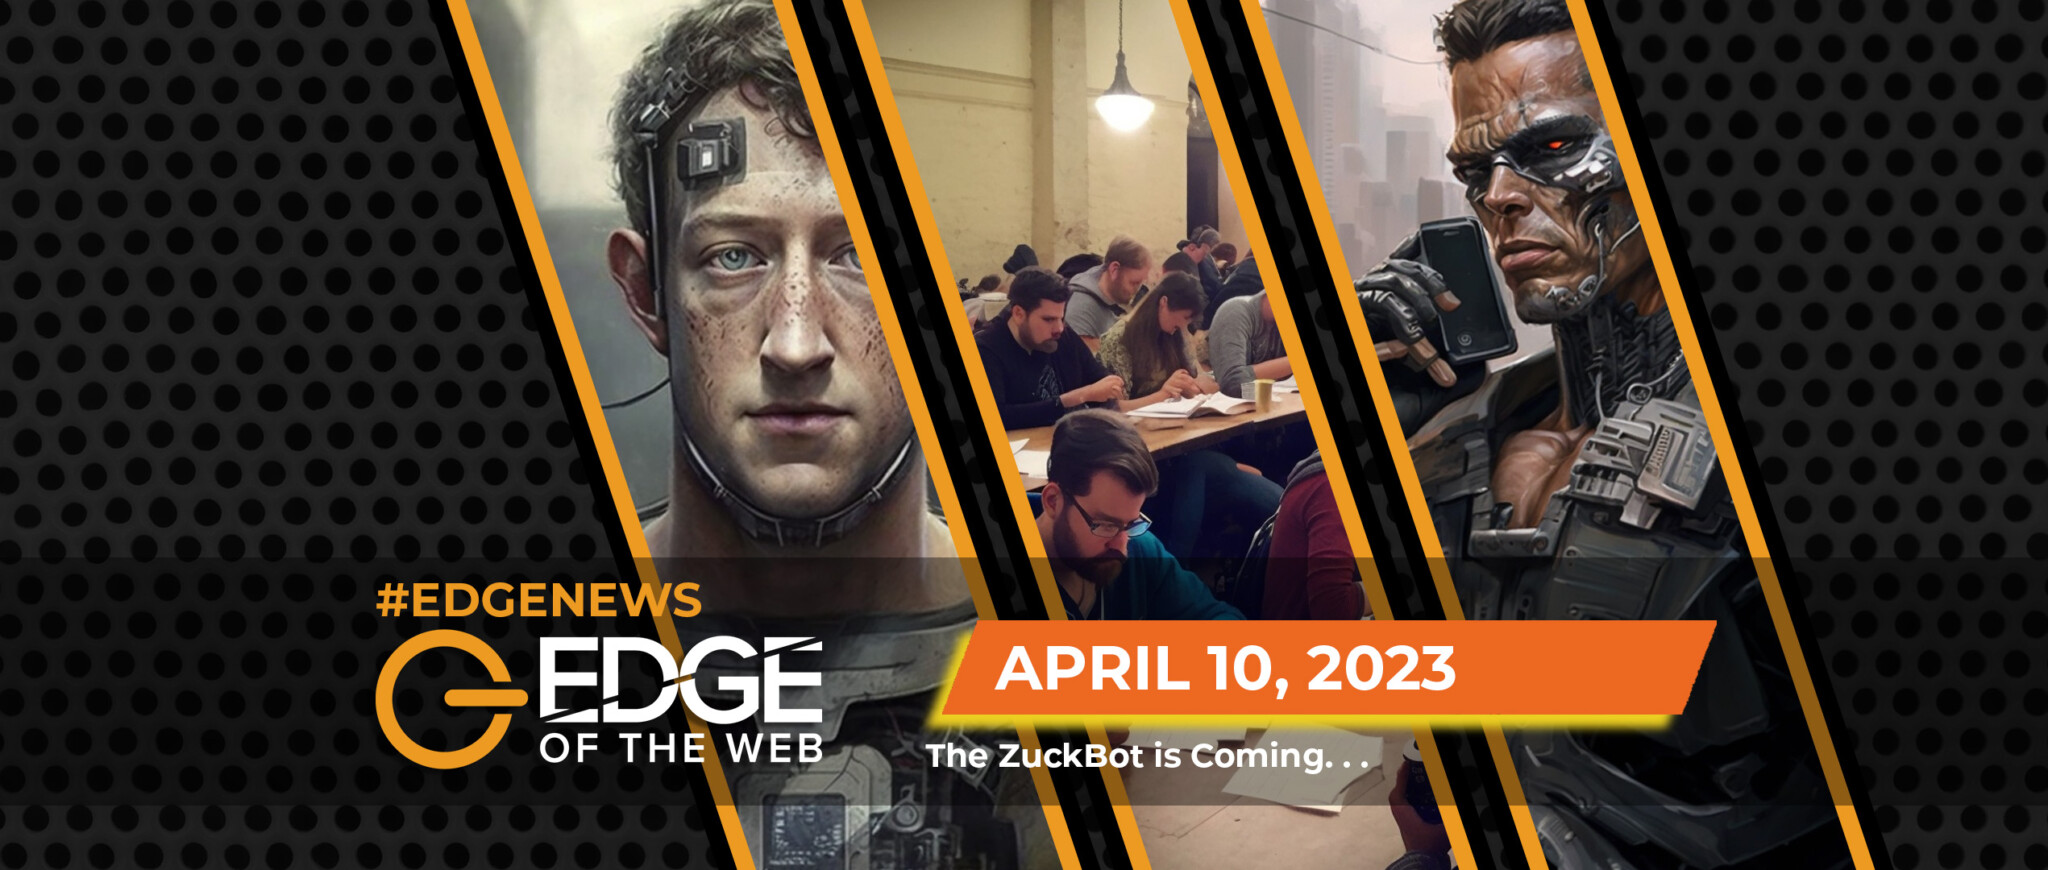 Episode 584: News from April 10th, 2023